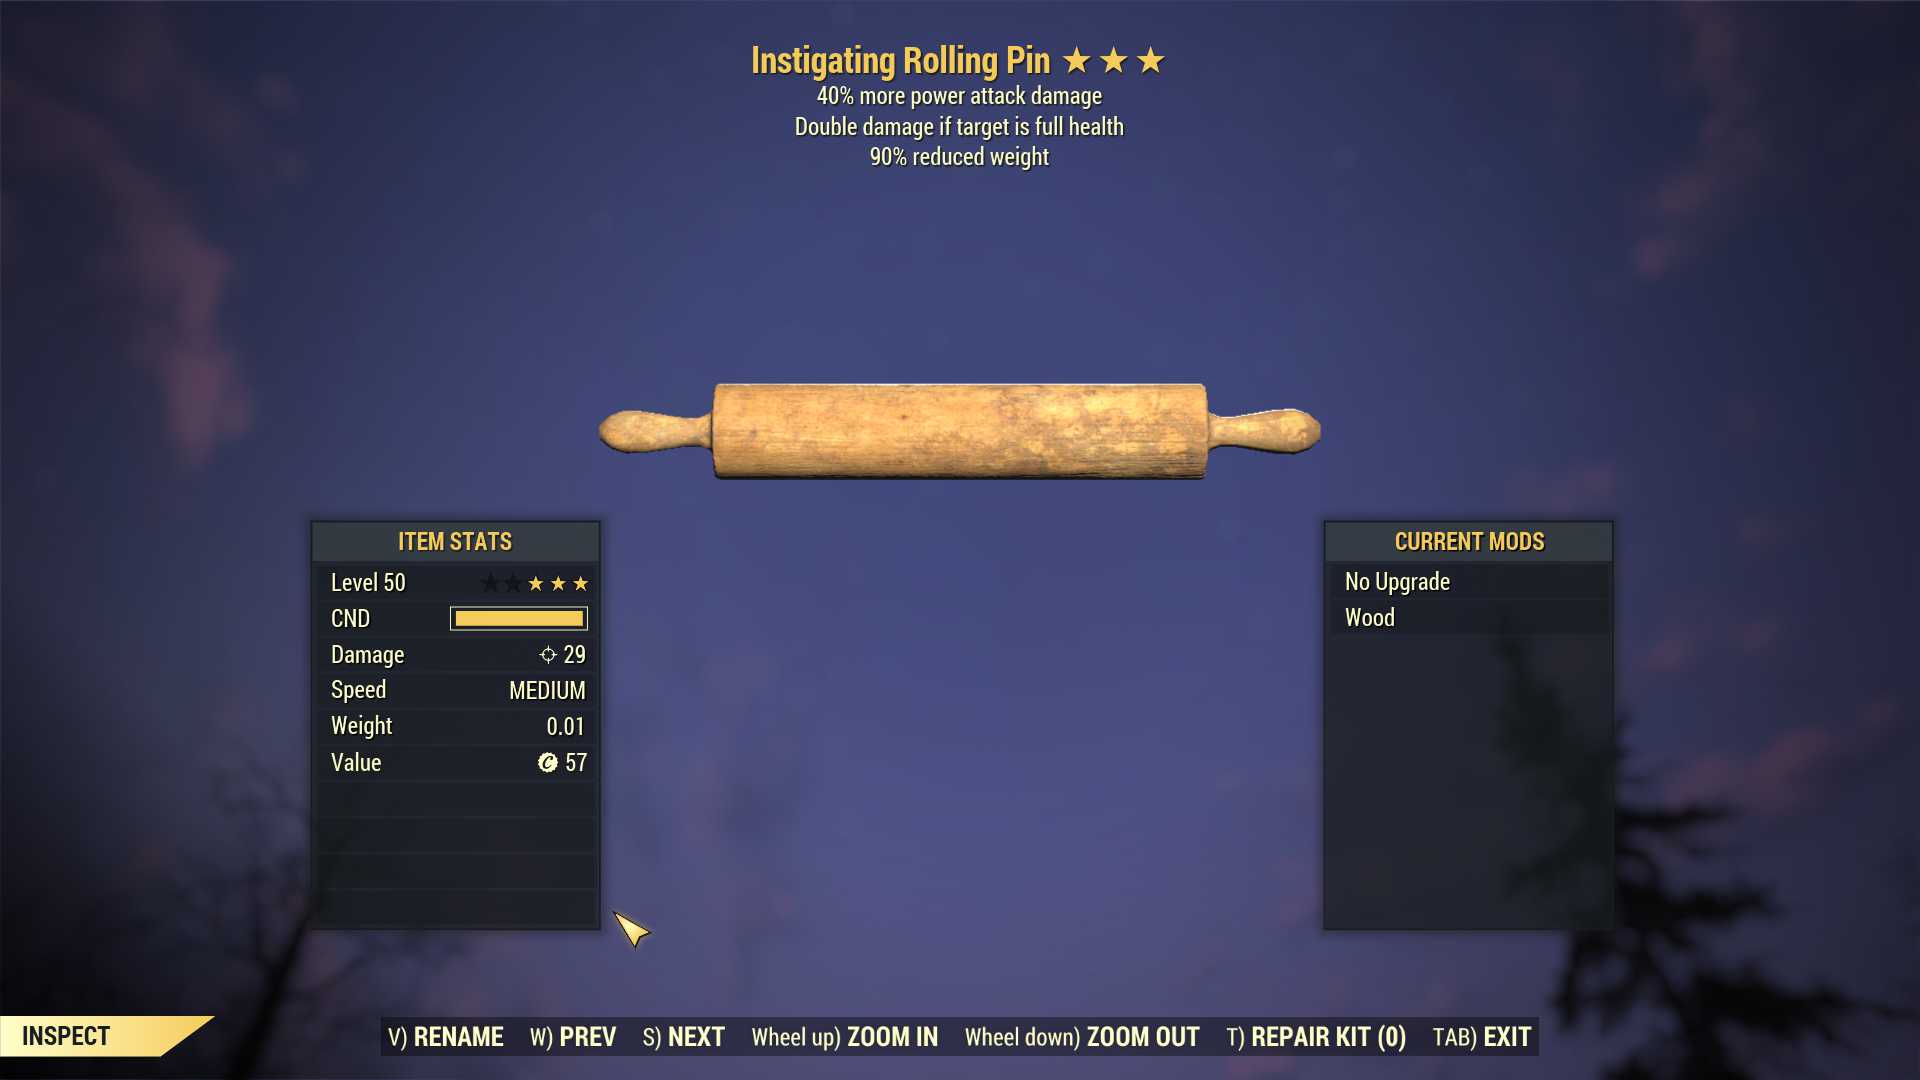 Instigating Rolling Pin (+40% damage PA, 90% reduced weight)